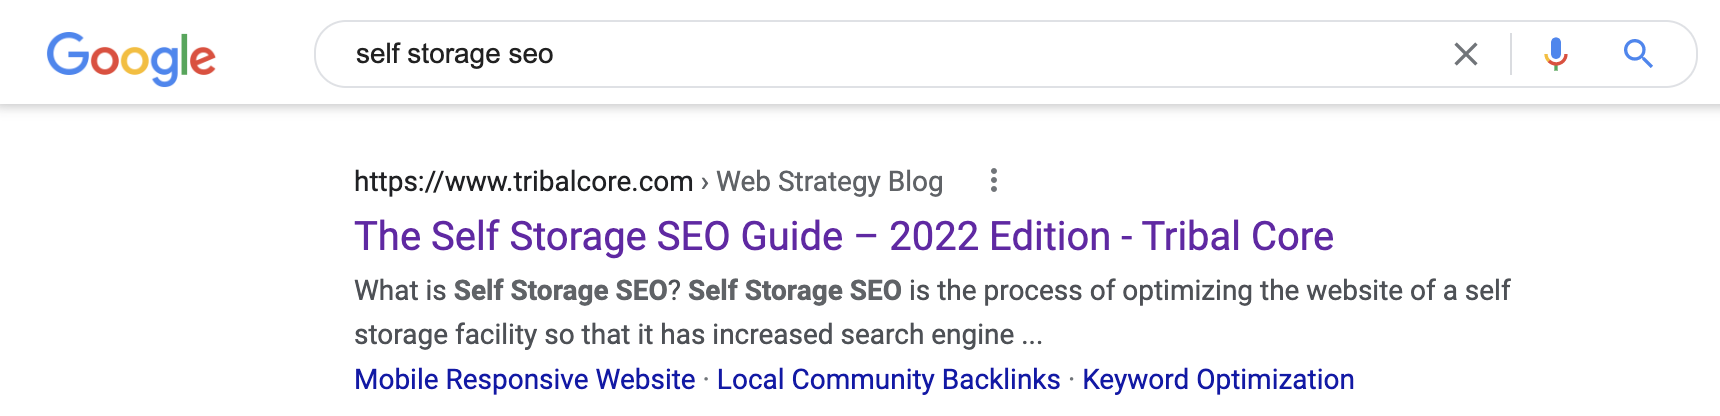 top result on Google search for self storage SEO